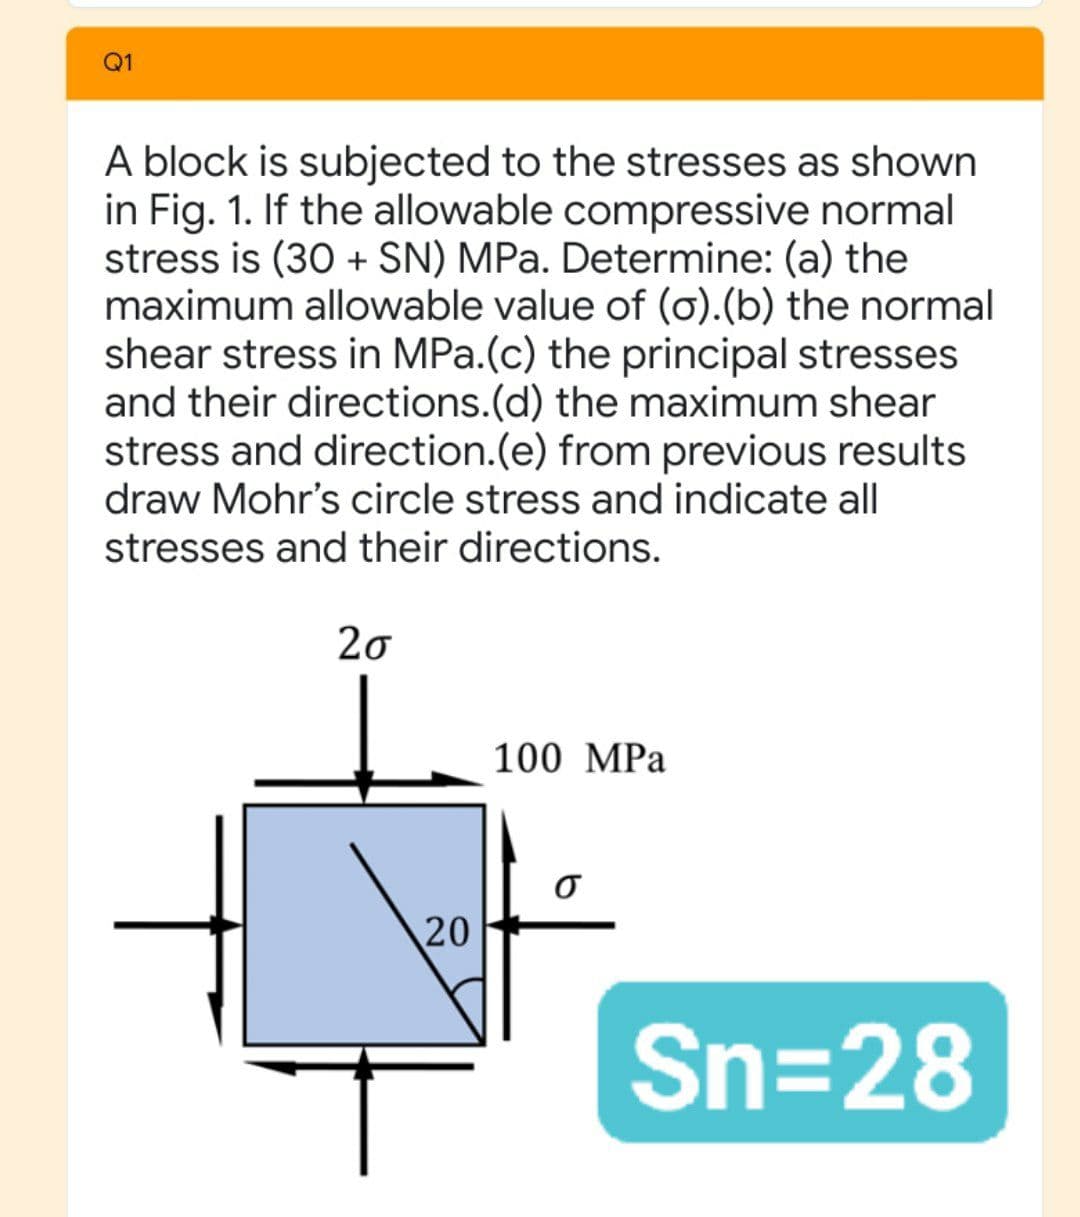 Q1
A block is subjected to the stresses as shown
in Fig. 1. If the allowable compressive normal
stress is (30 + SN) MPa. Determine: (a) the
maximum allowable value of (o).(b) the normal
shear stress in MPa.(c) the principal stresses
and their directions.(d) the maximum shear
stress and direction.(e) from previous results
draw Mohr's circle stress and indicate all
stresses and their directions.
20
100 MPa
20
Sn=28
